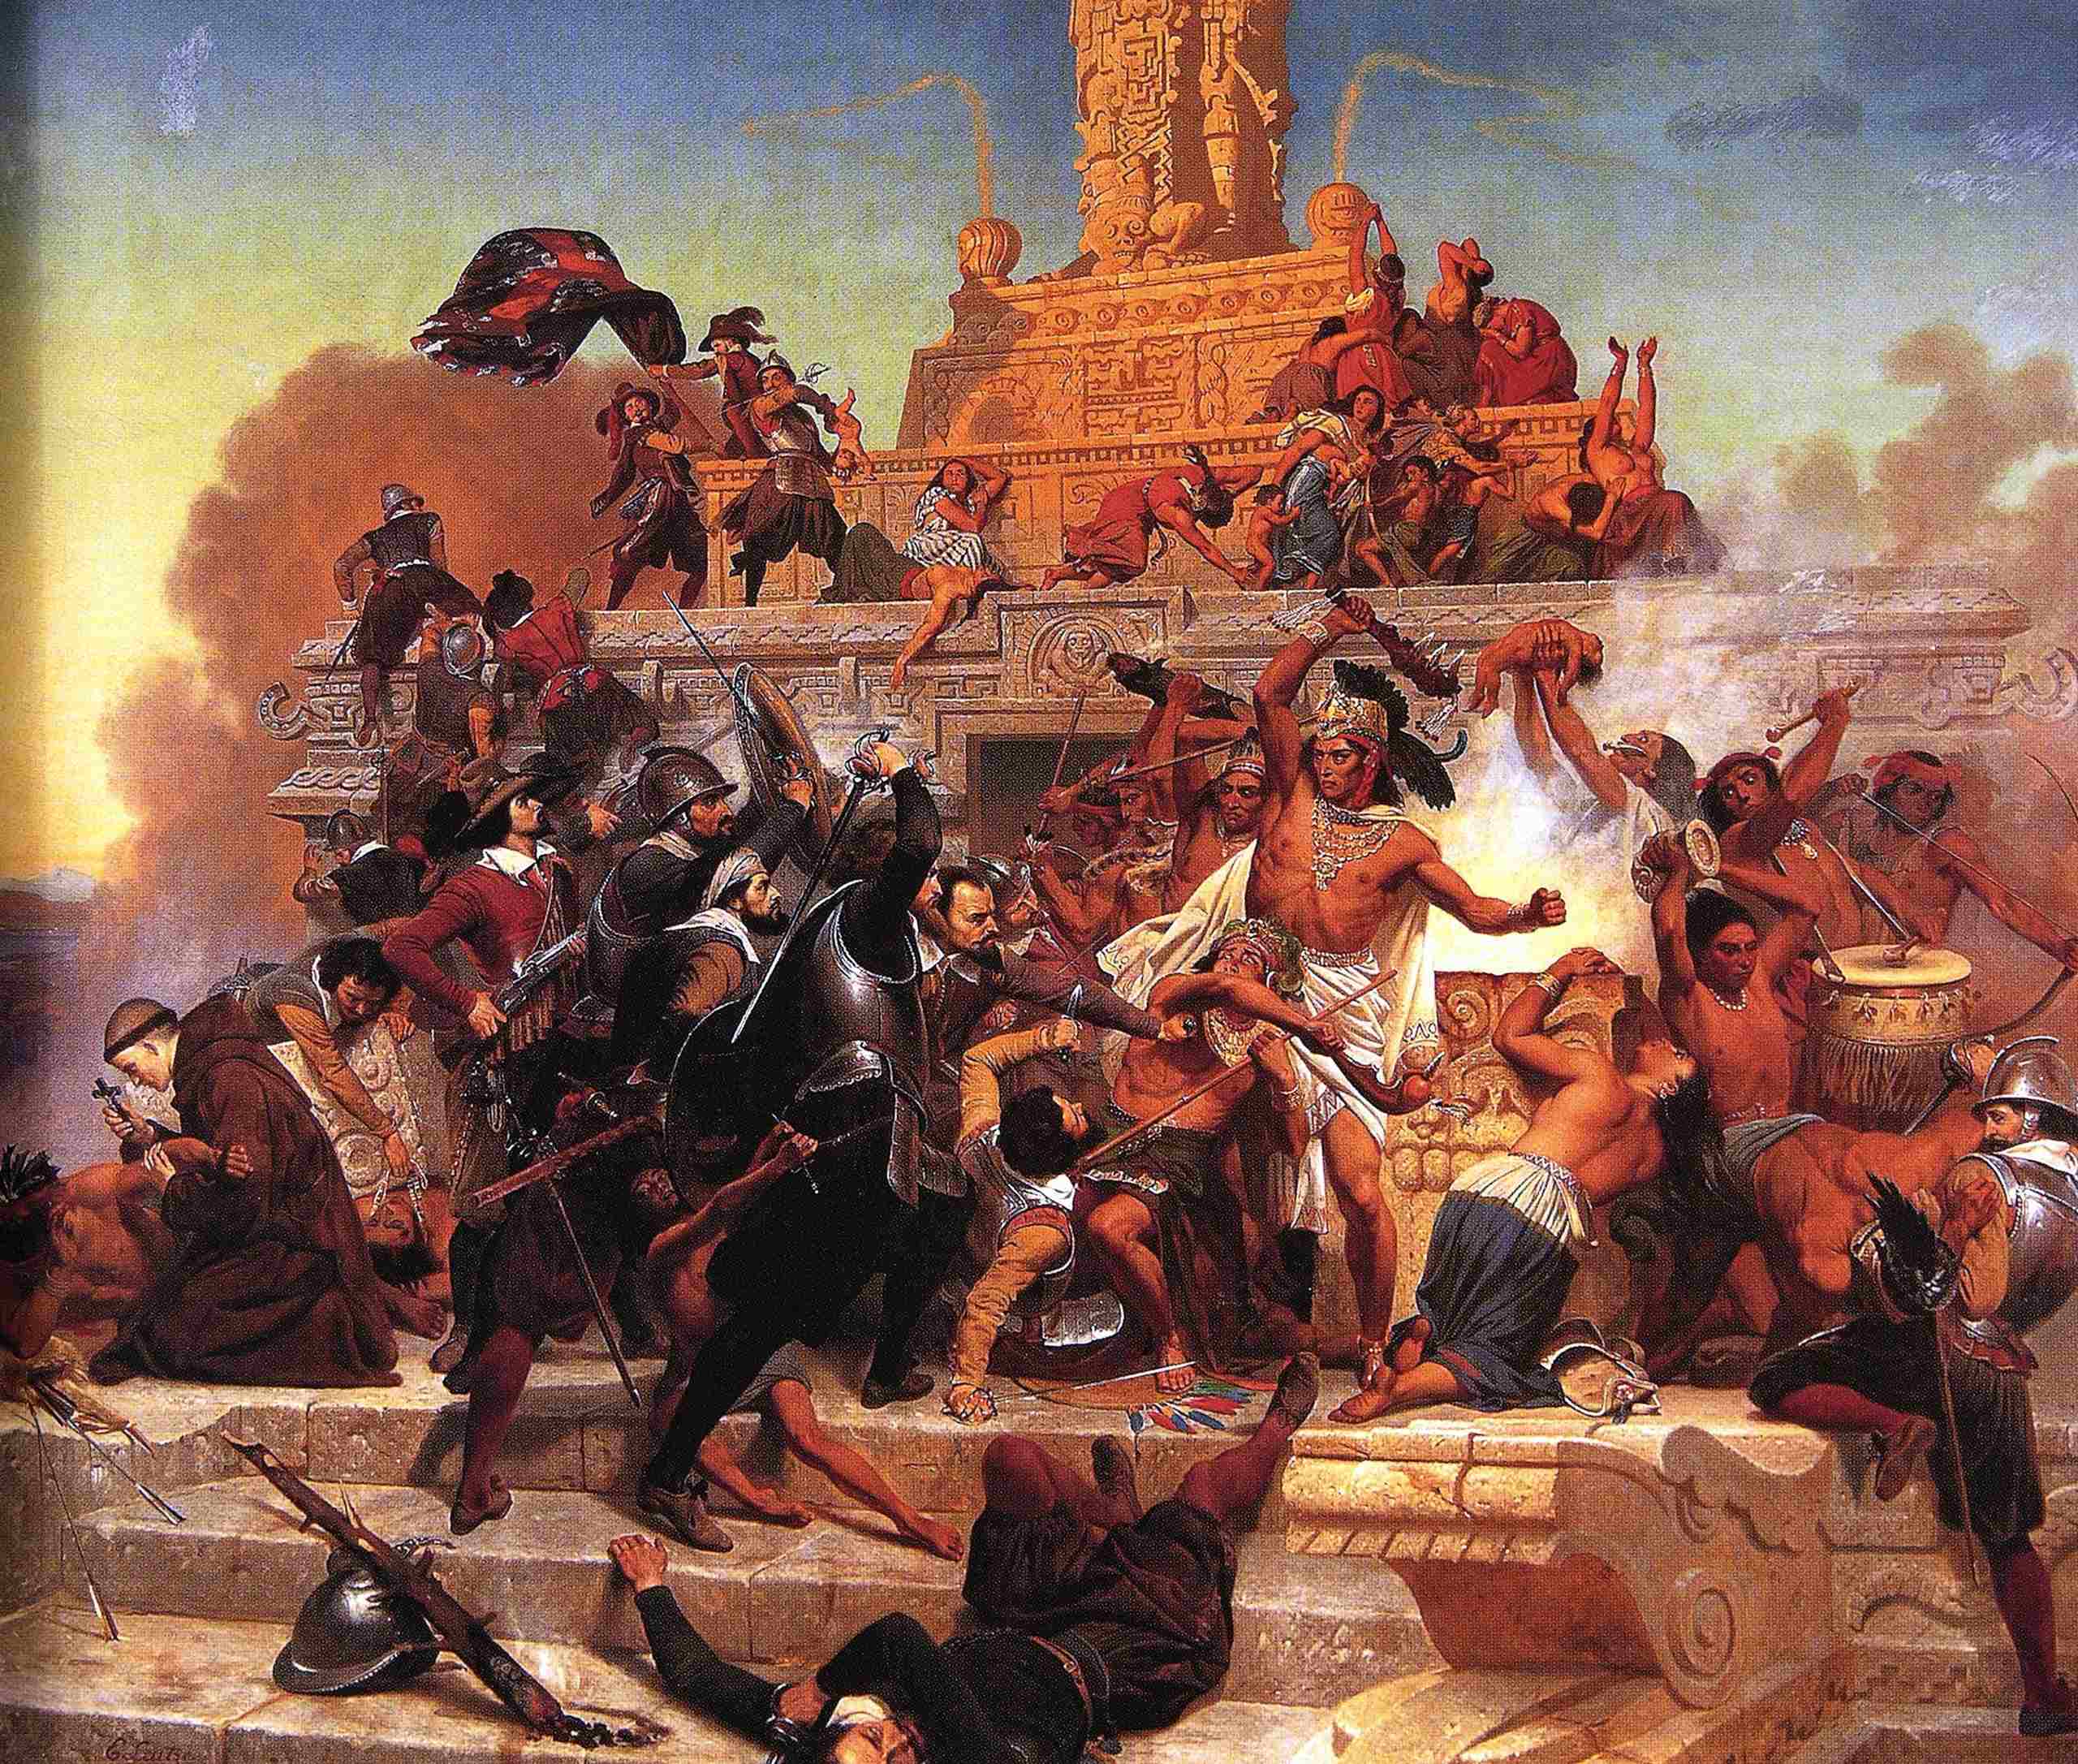 leutze - Storming of the Teocalli by Cortez and His Troops. 1848.